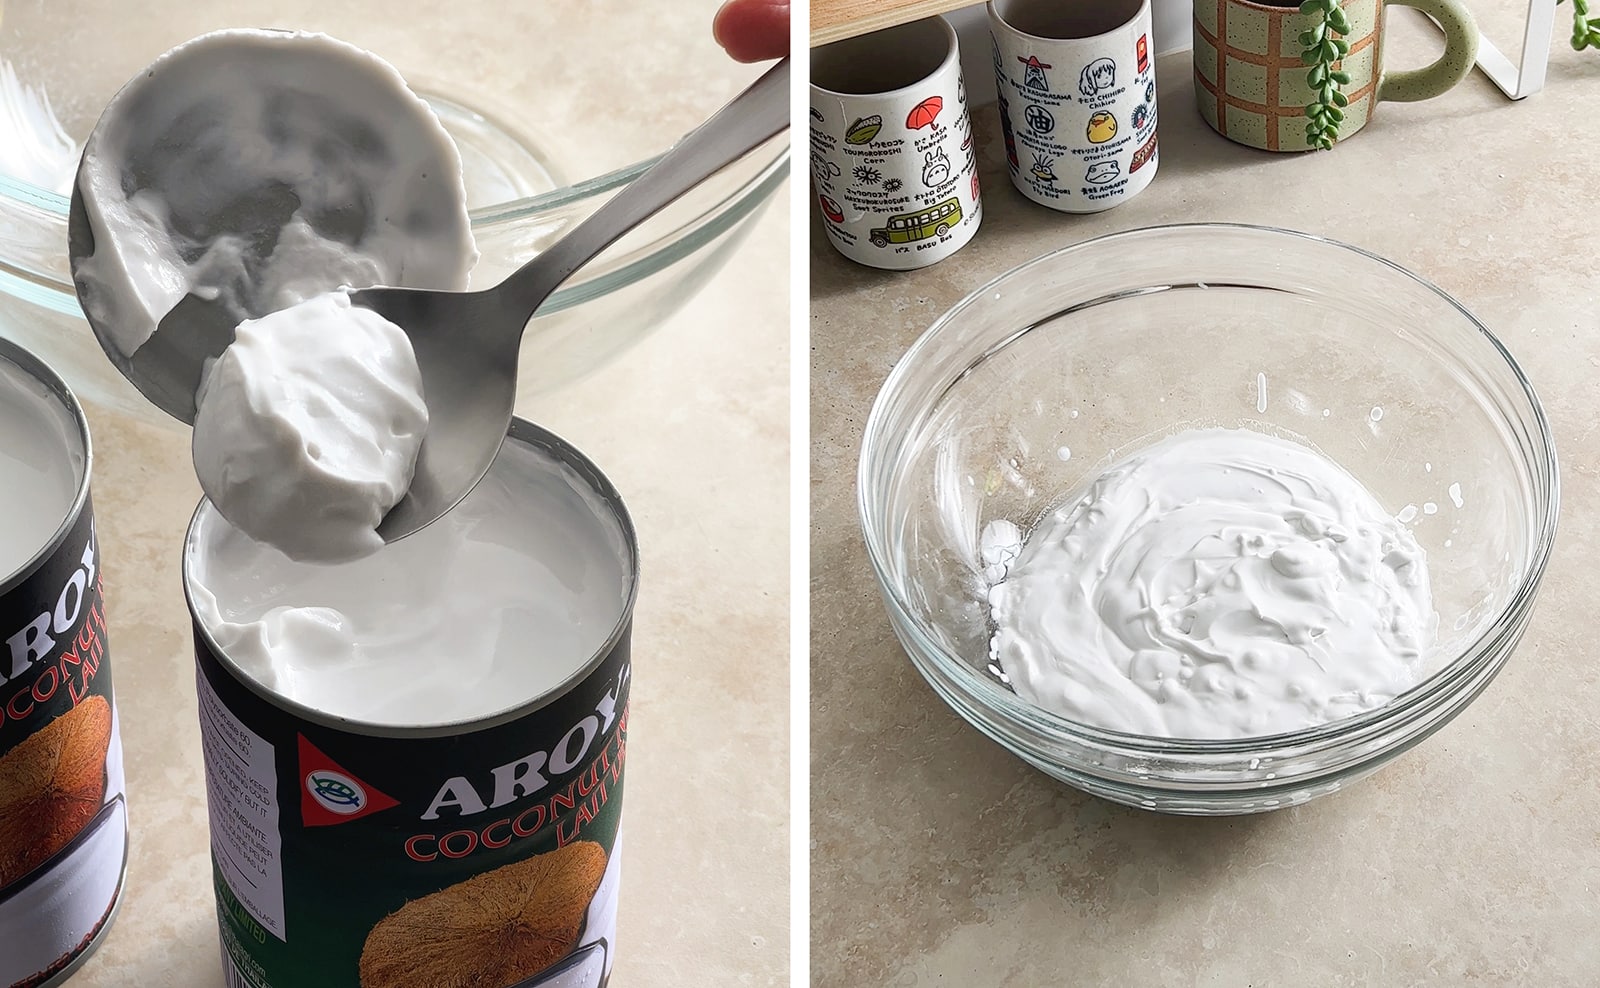 Left to right: scooping thick coconut cream out of a can with a spoon, coconut cream in a bowl.